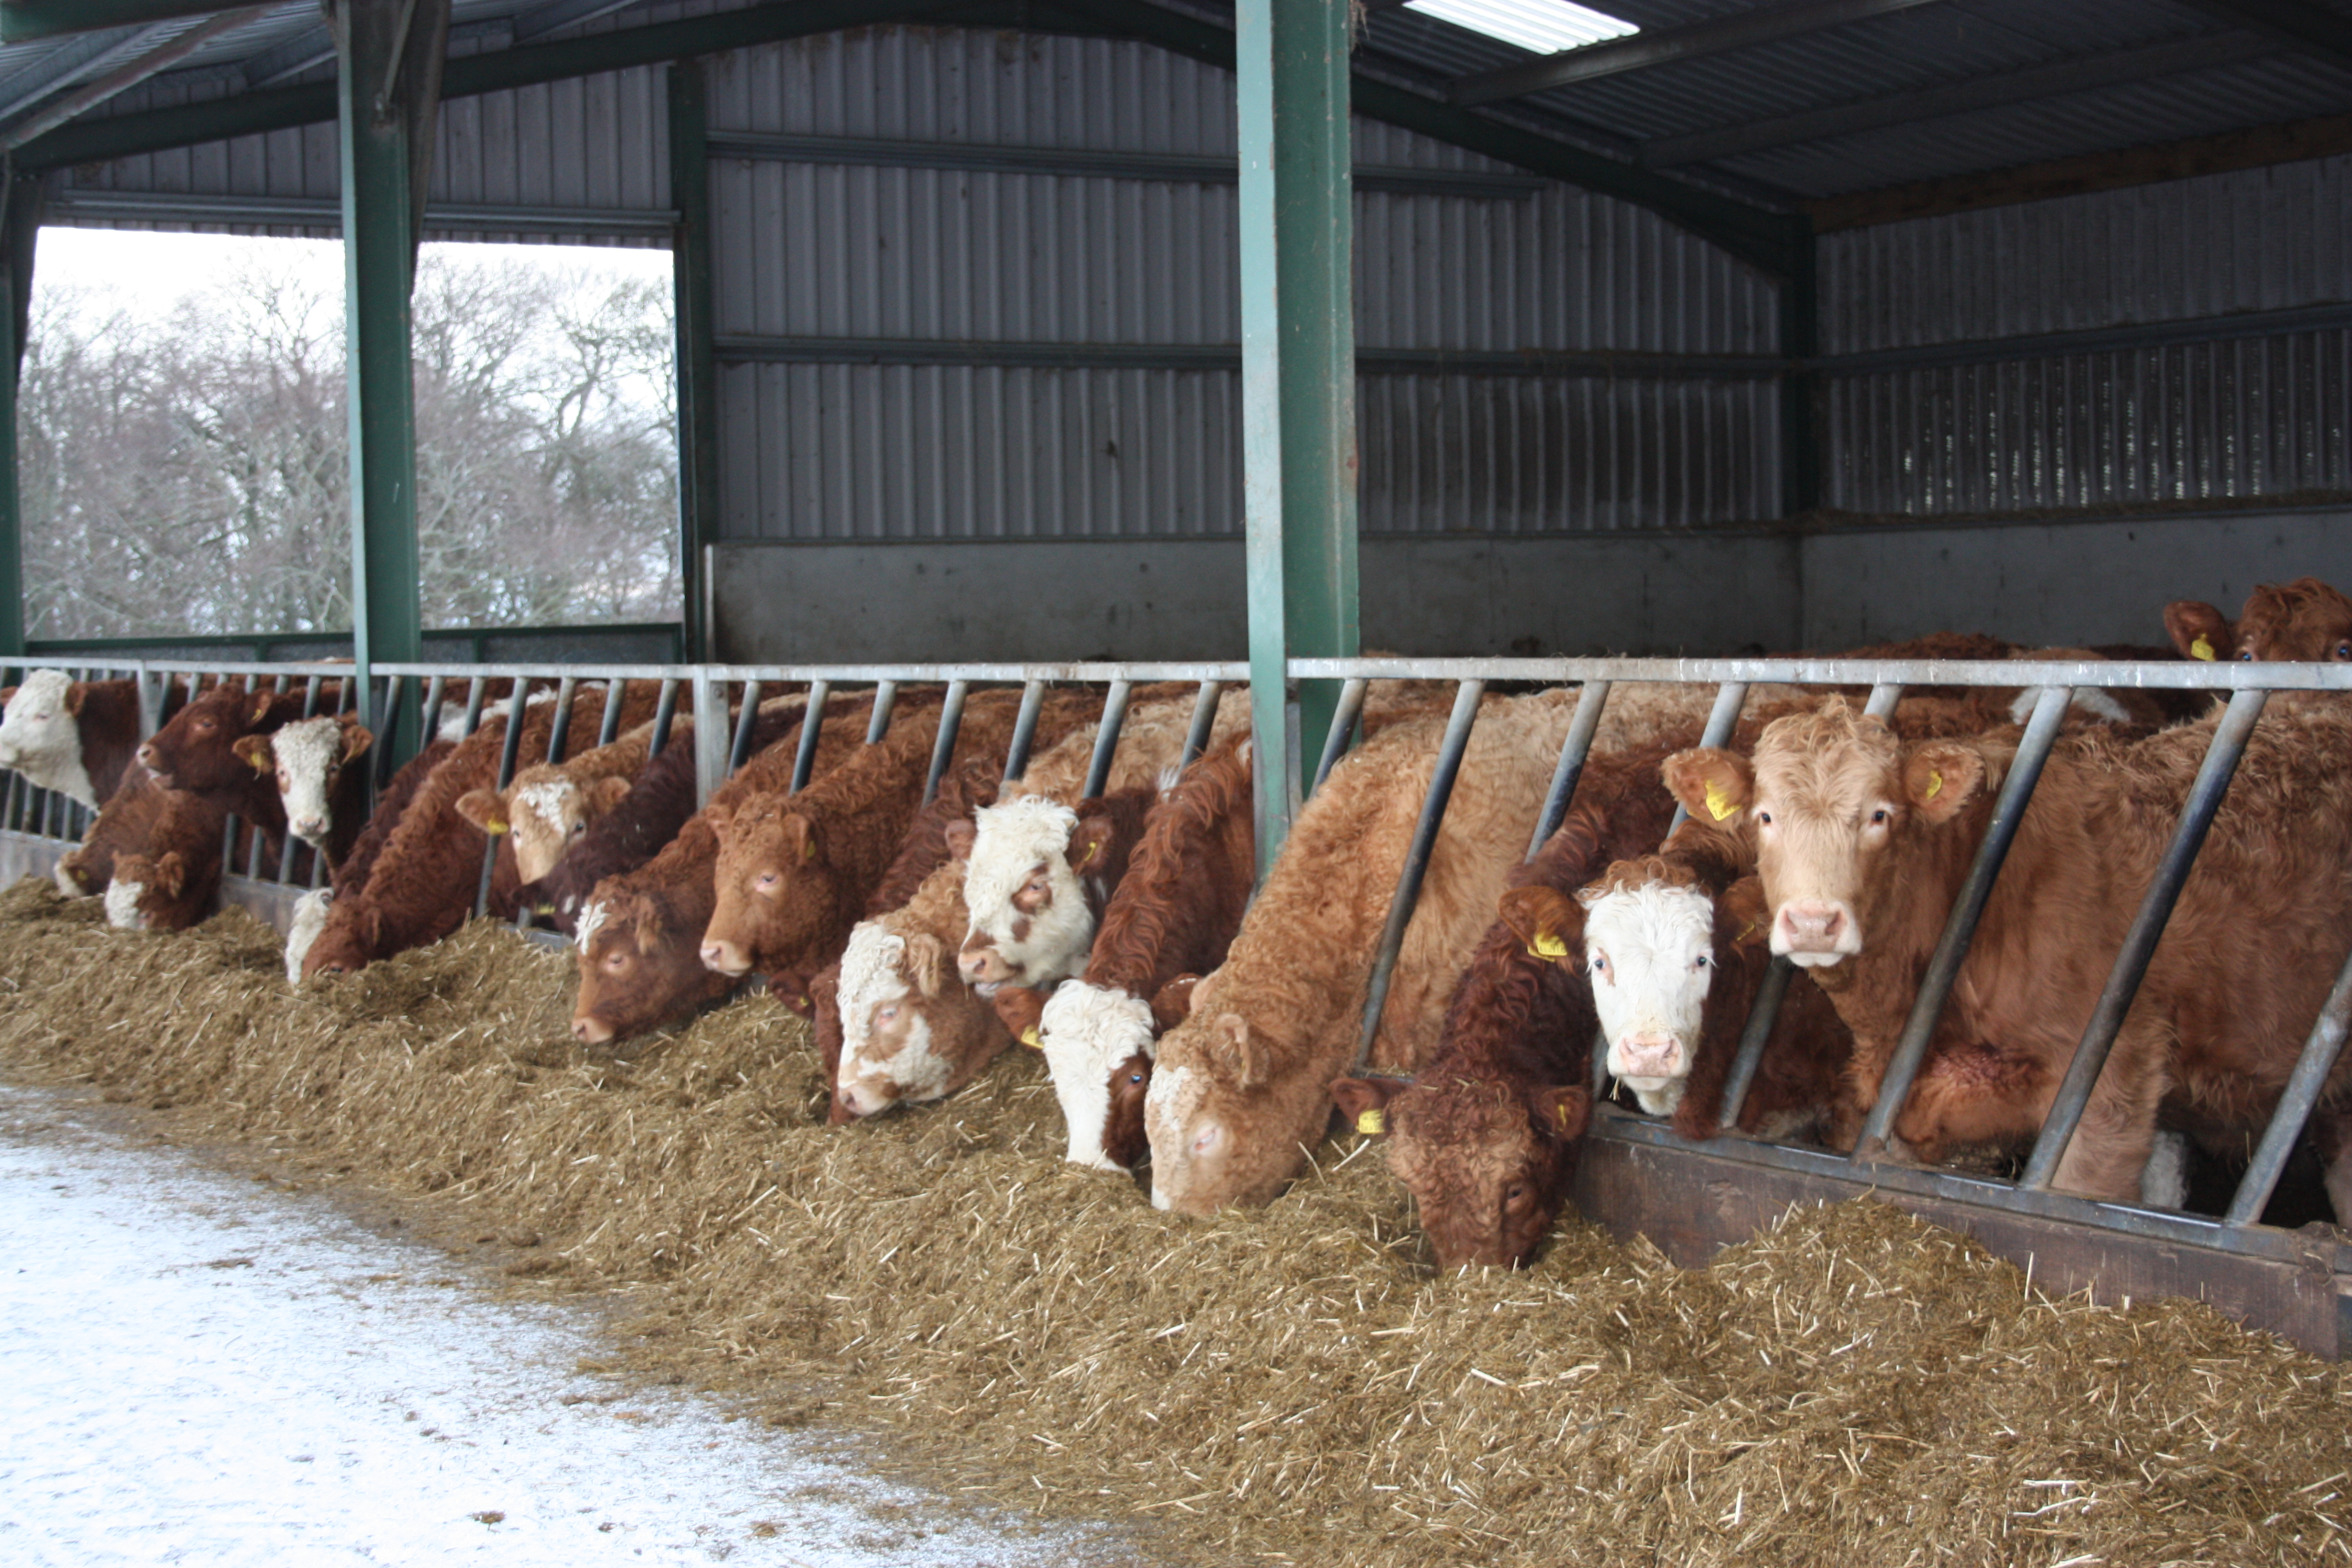 STFA calls for feedstuffs to go to livestock not renewable energy during fodder crisis